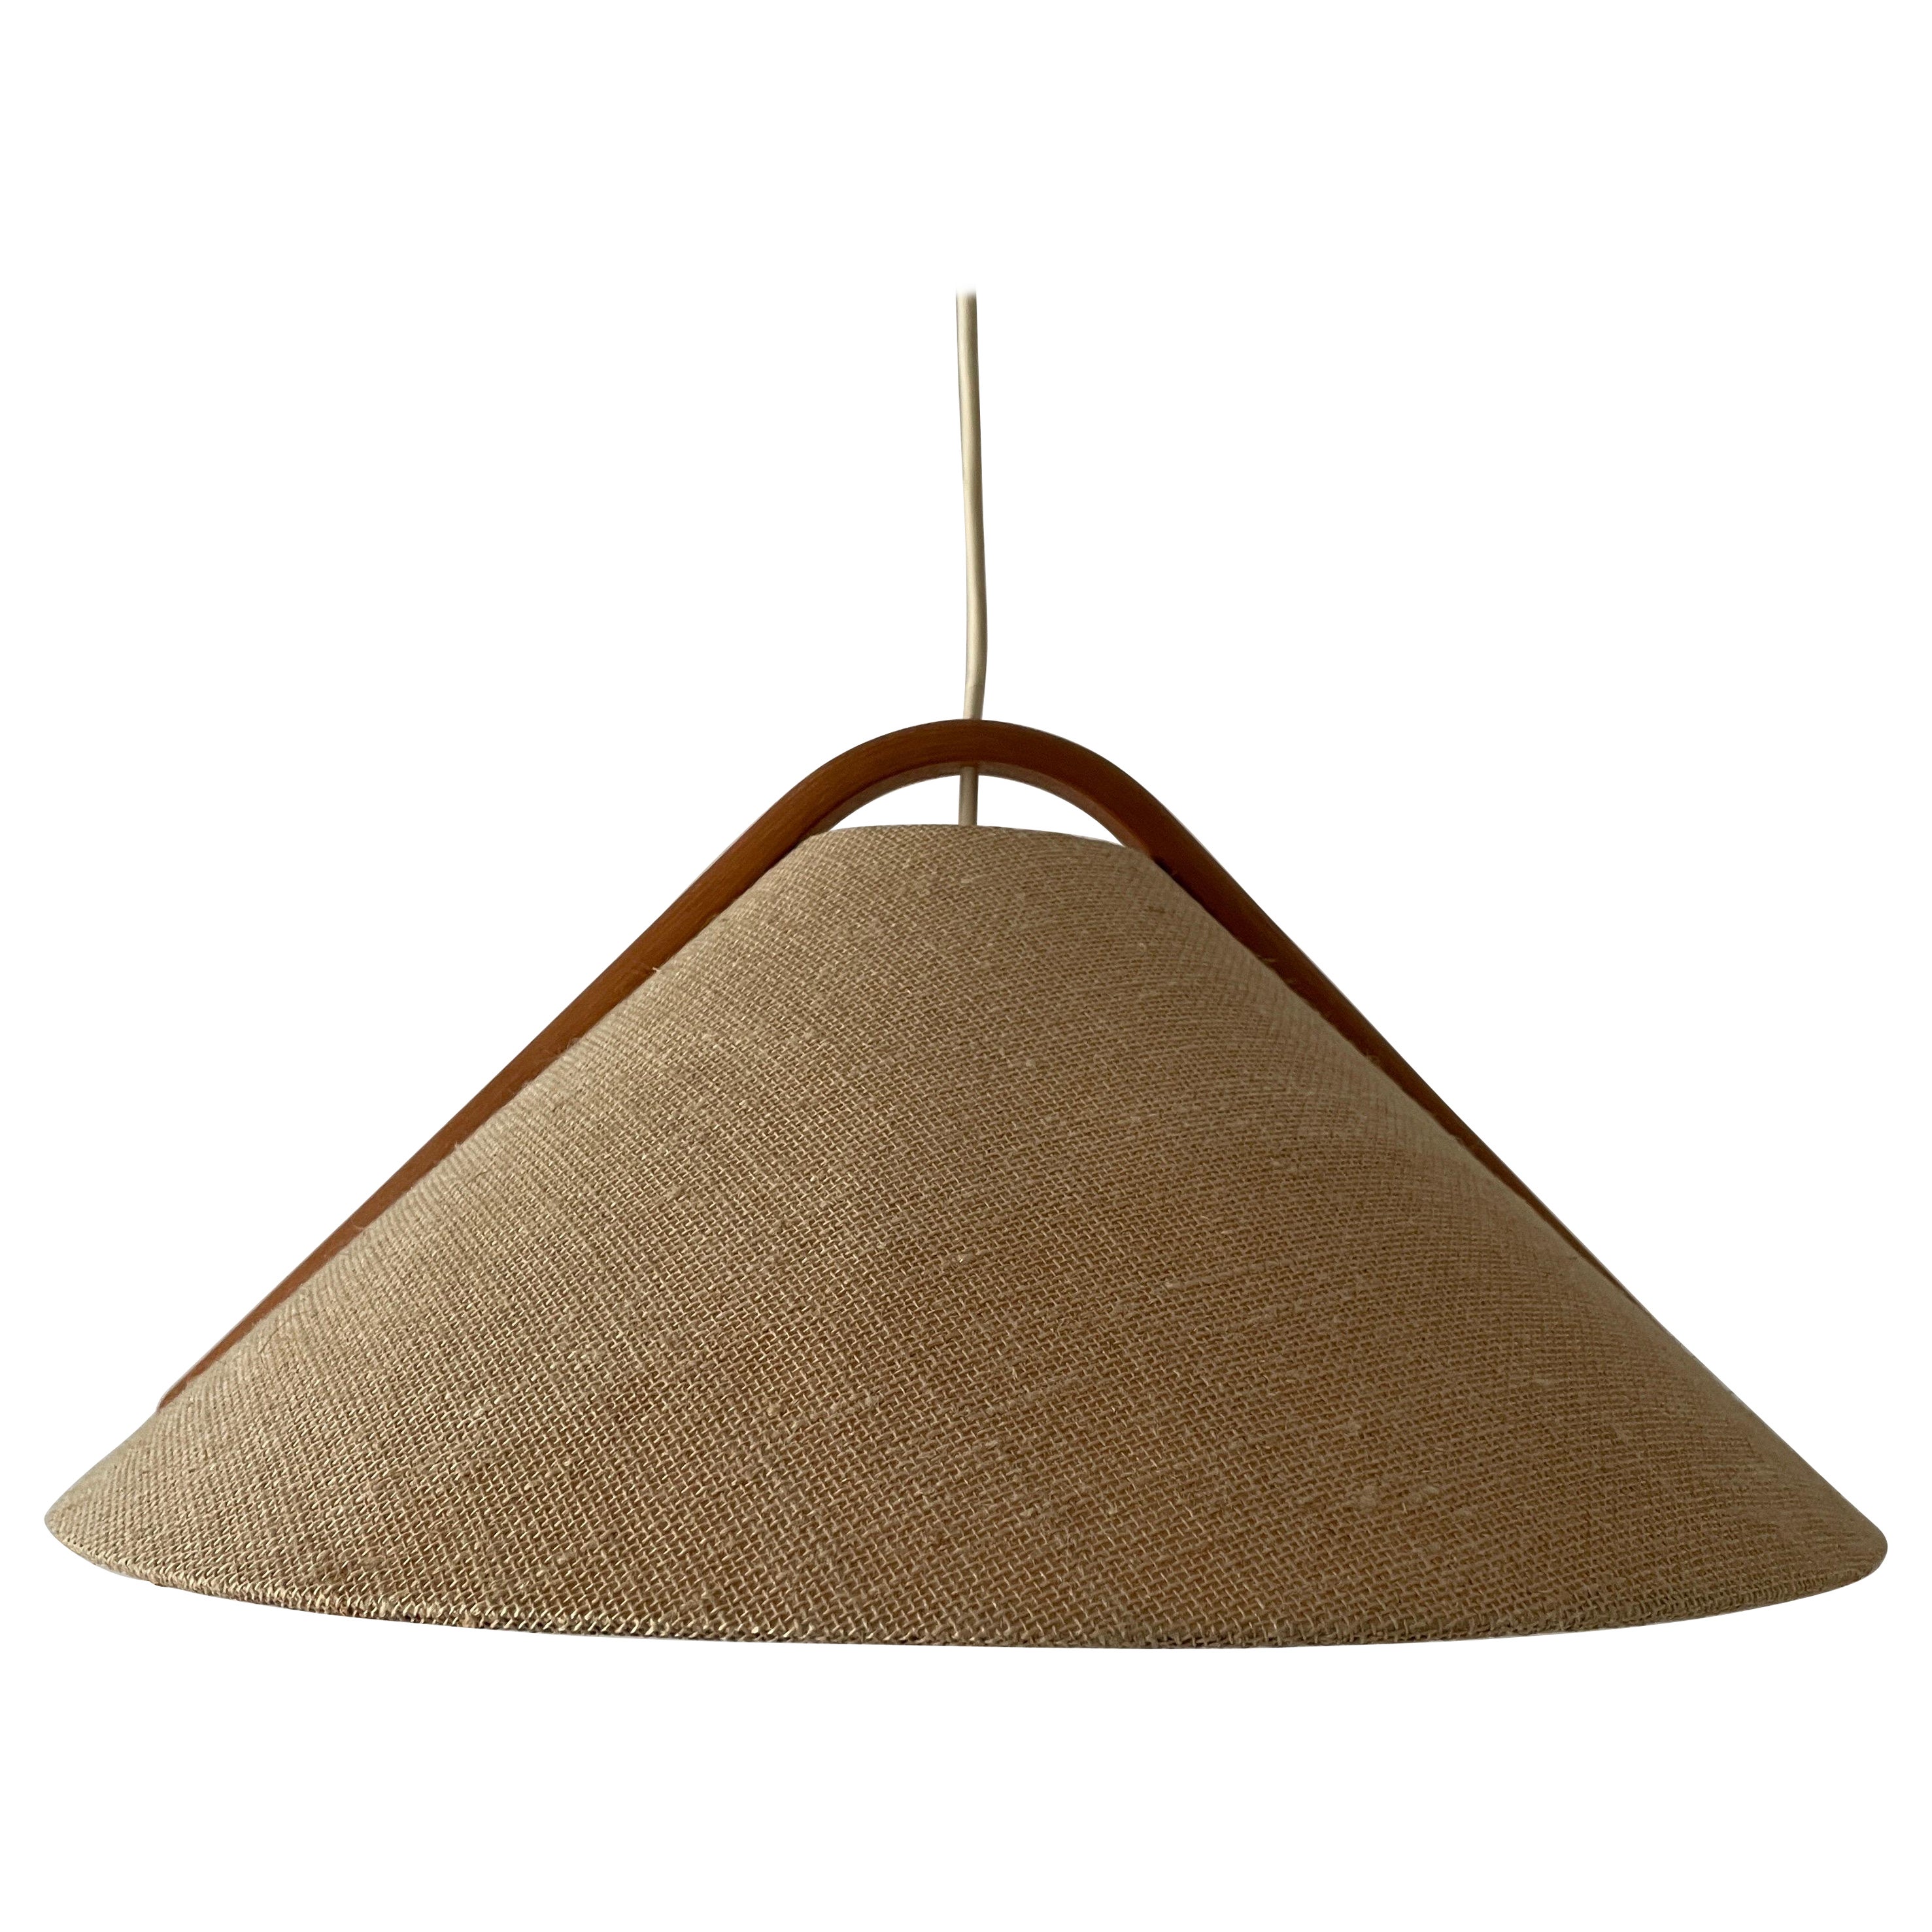 Conic Design Fabric Pendant Lamp with Teak Detail, 1960s, Germany For Sale